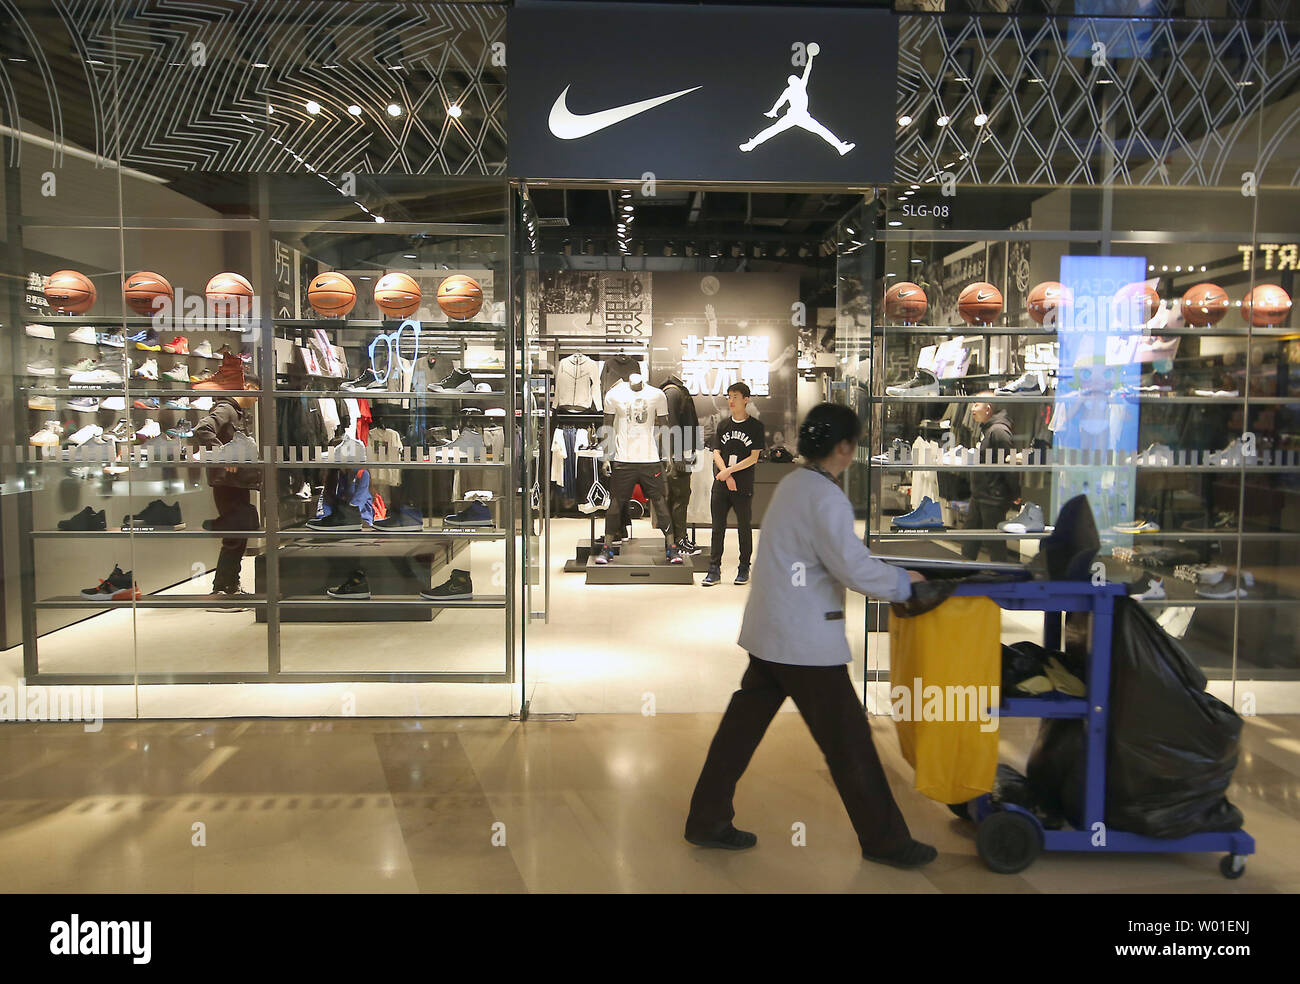 U.S.-based Nike Air Jordan store recently opened an outlet in Beijing on  April 3, 2018. China says ti will respond to any new trade tariffs by the  U.S. with measures of the